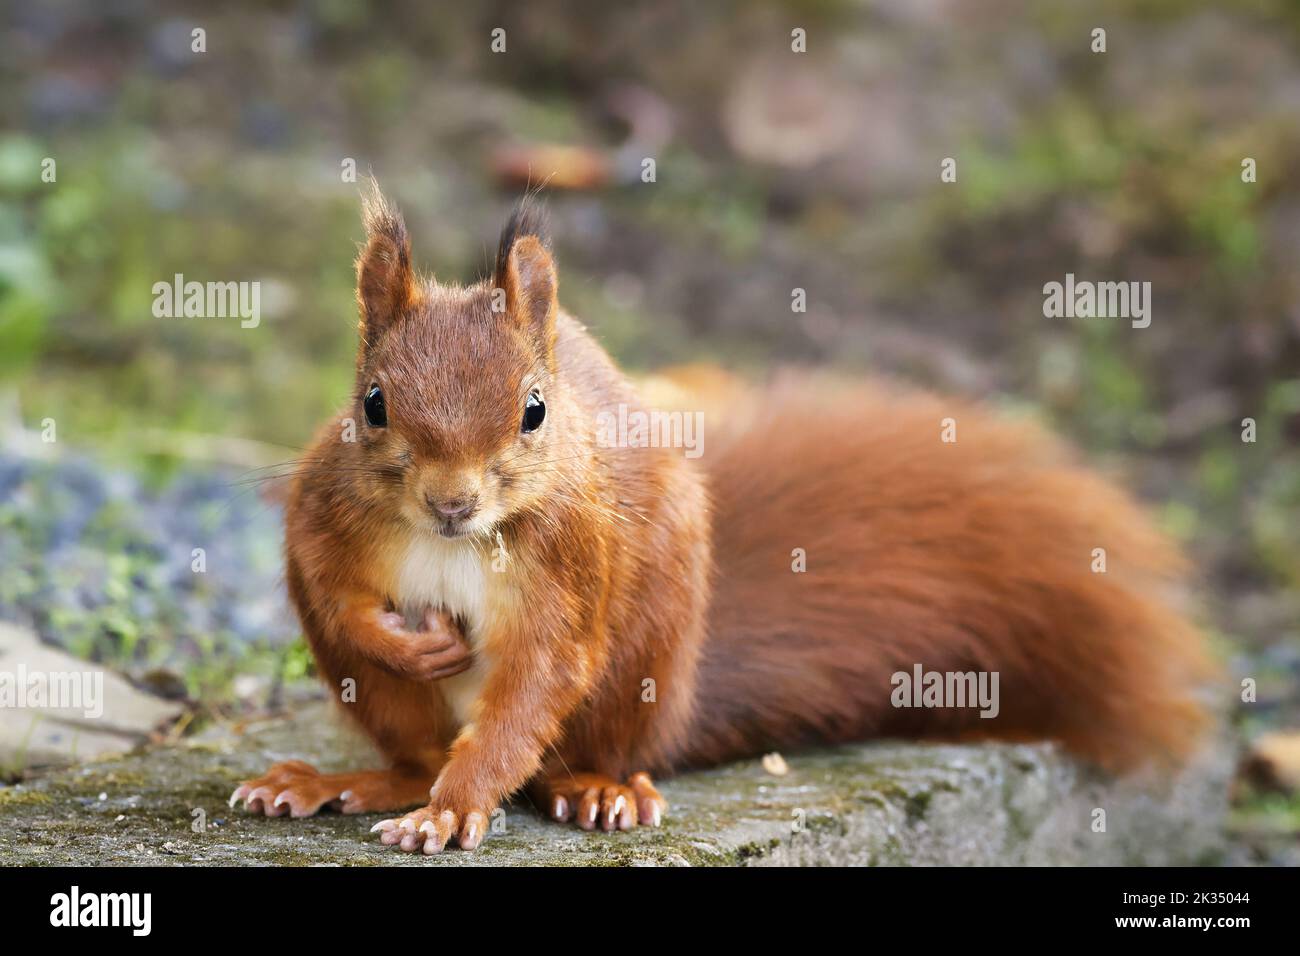 squirrel looks curiously into the camera while scratching his belly Stock Photo